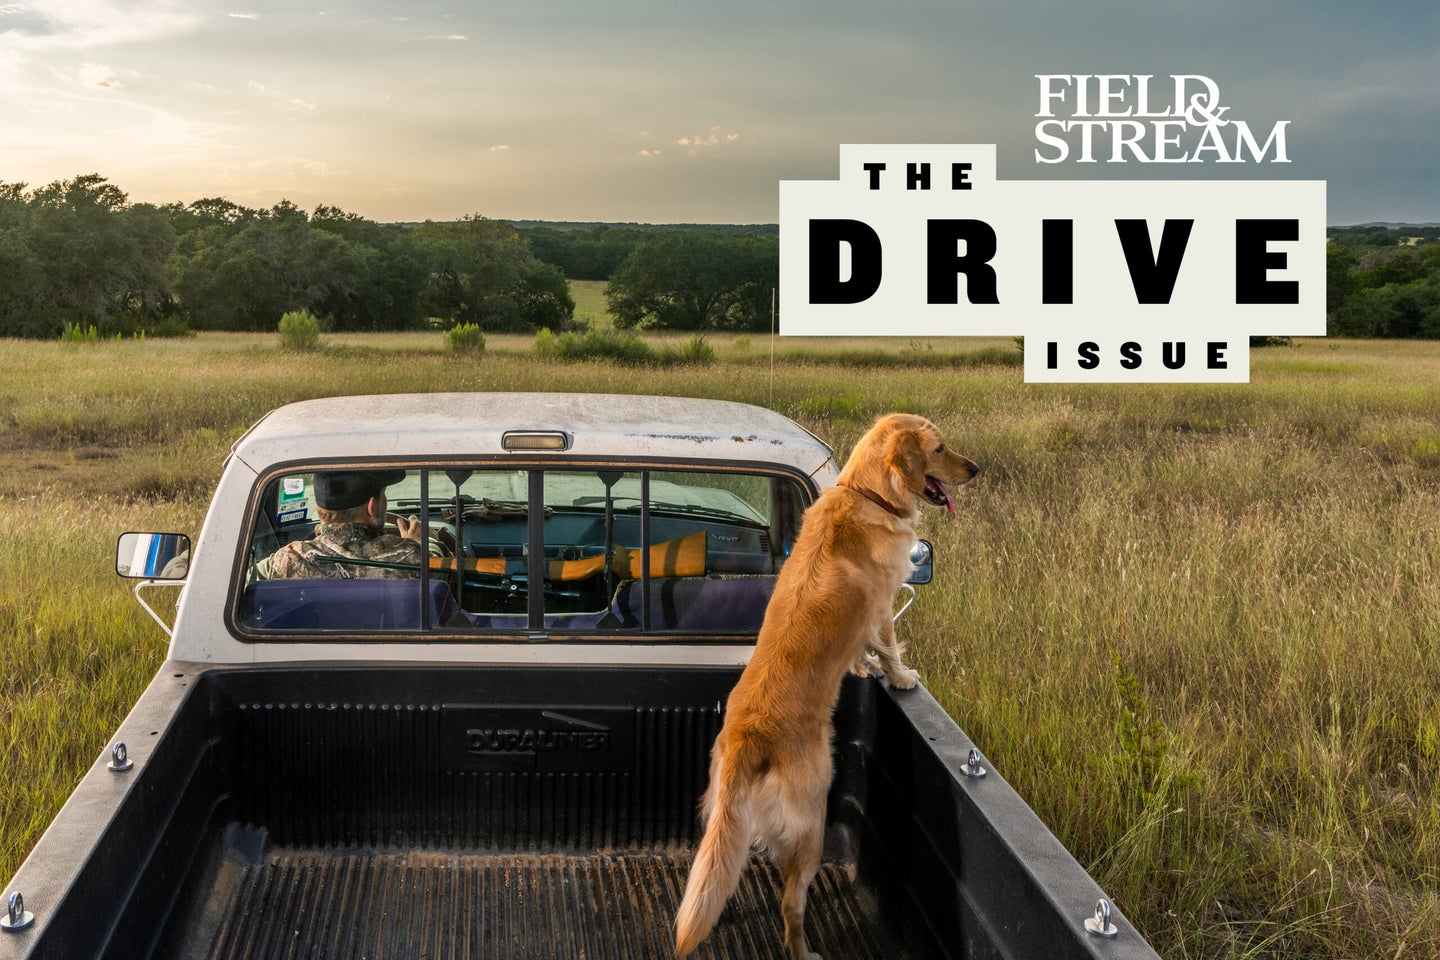 The Drive Issue of Field & Stream